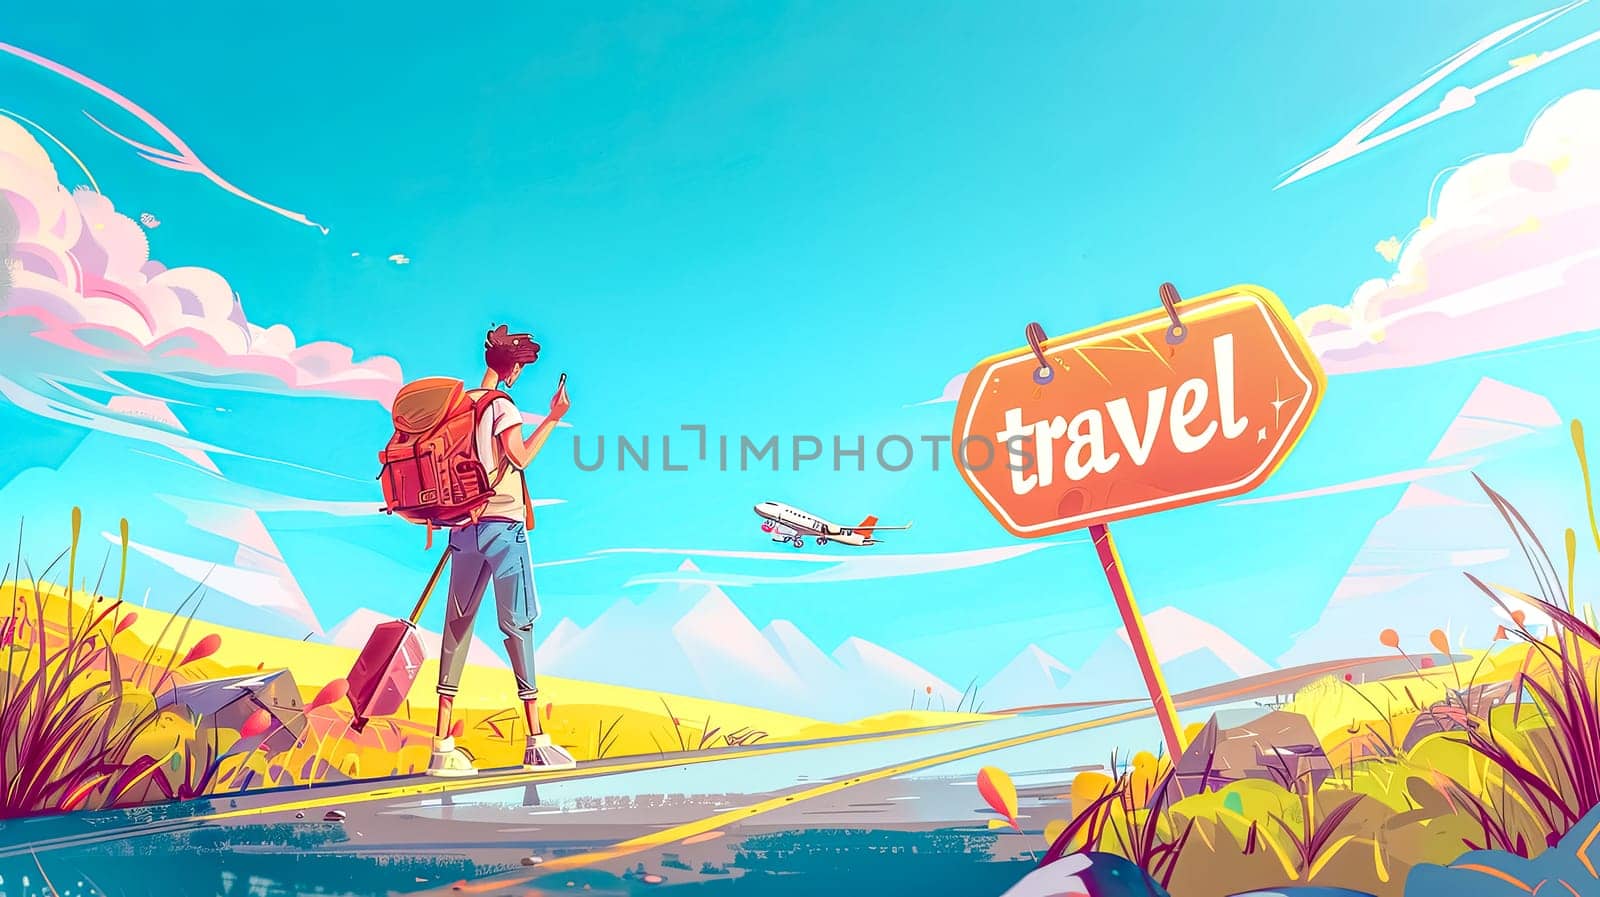 Lone traveler with a backpack gazes at a plane flying over a scenic route at sunset